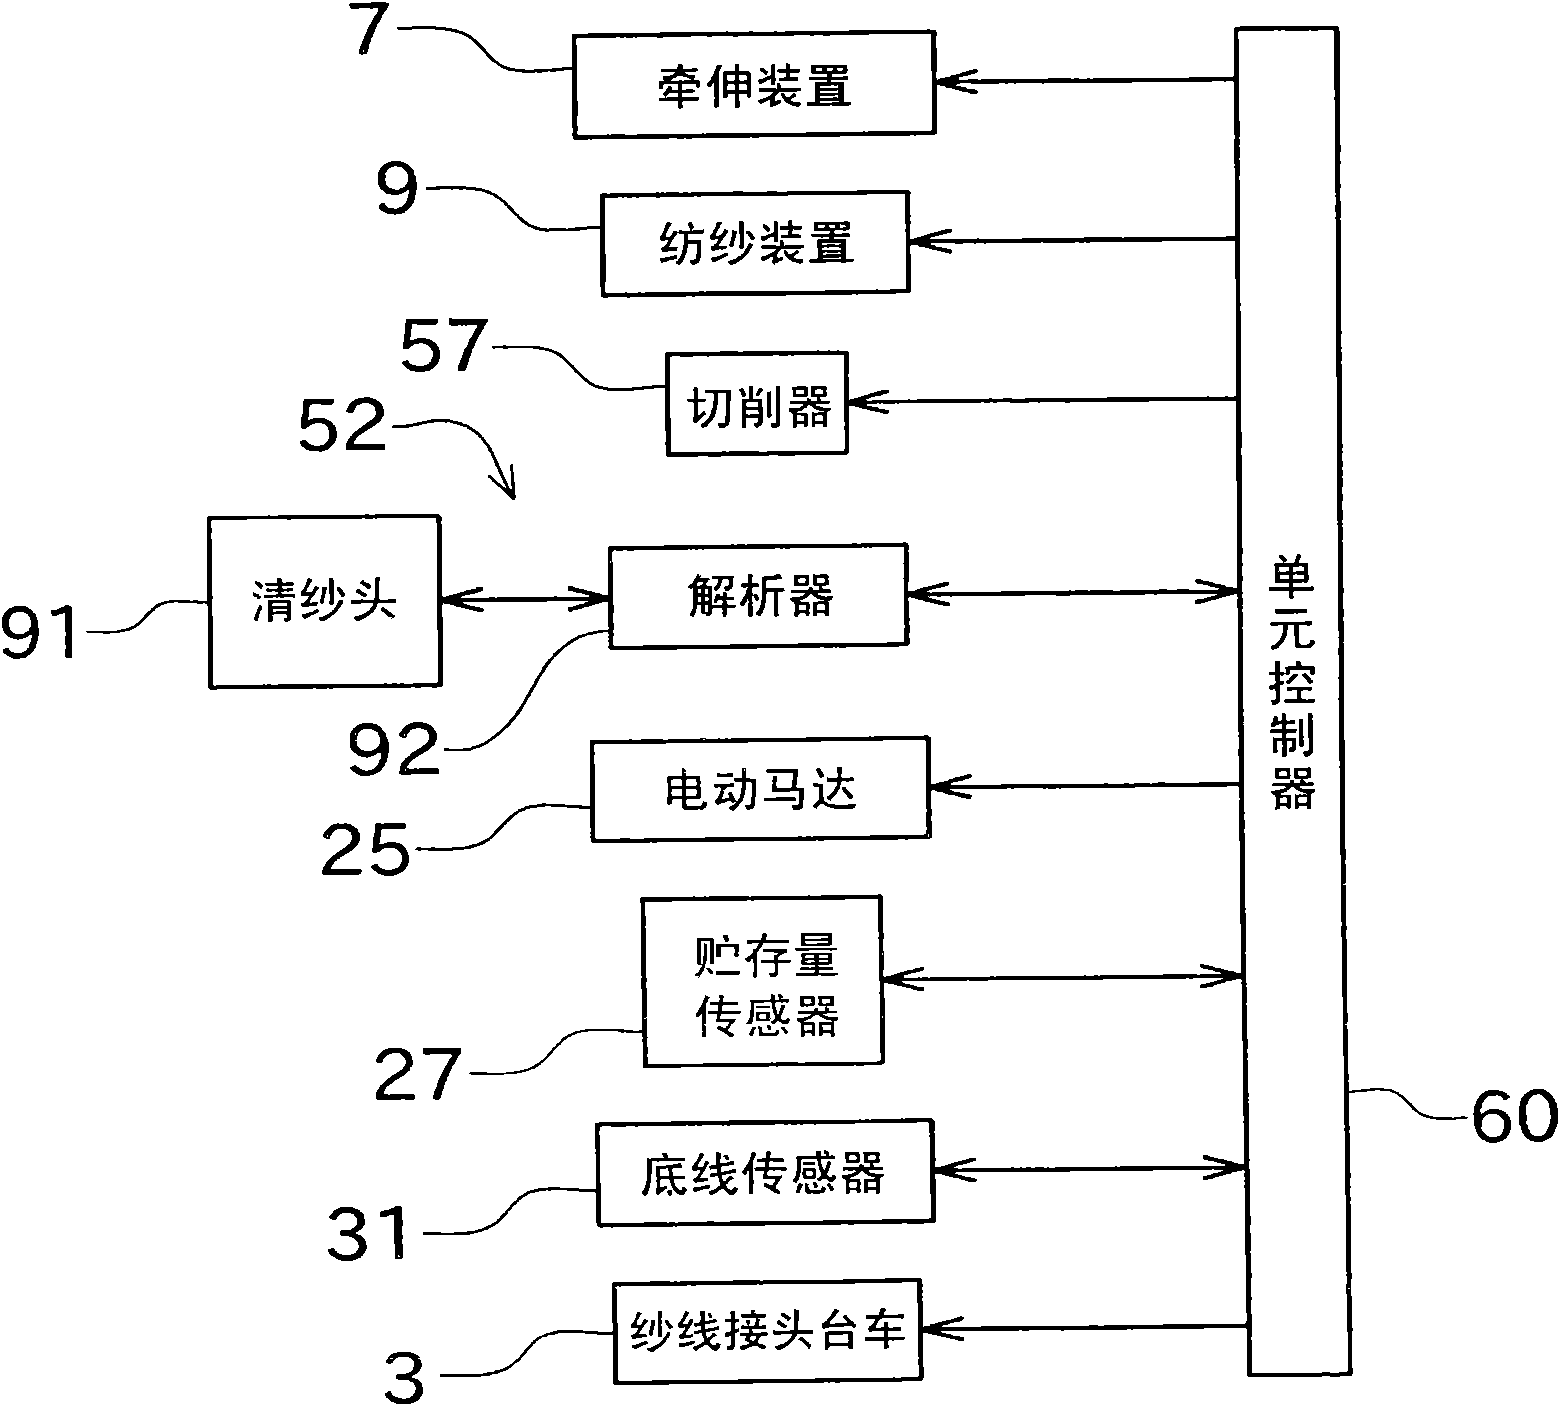 Spinning machine and yarn removing method for removing yarn remaining on yarn accumulating roller